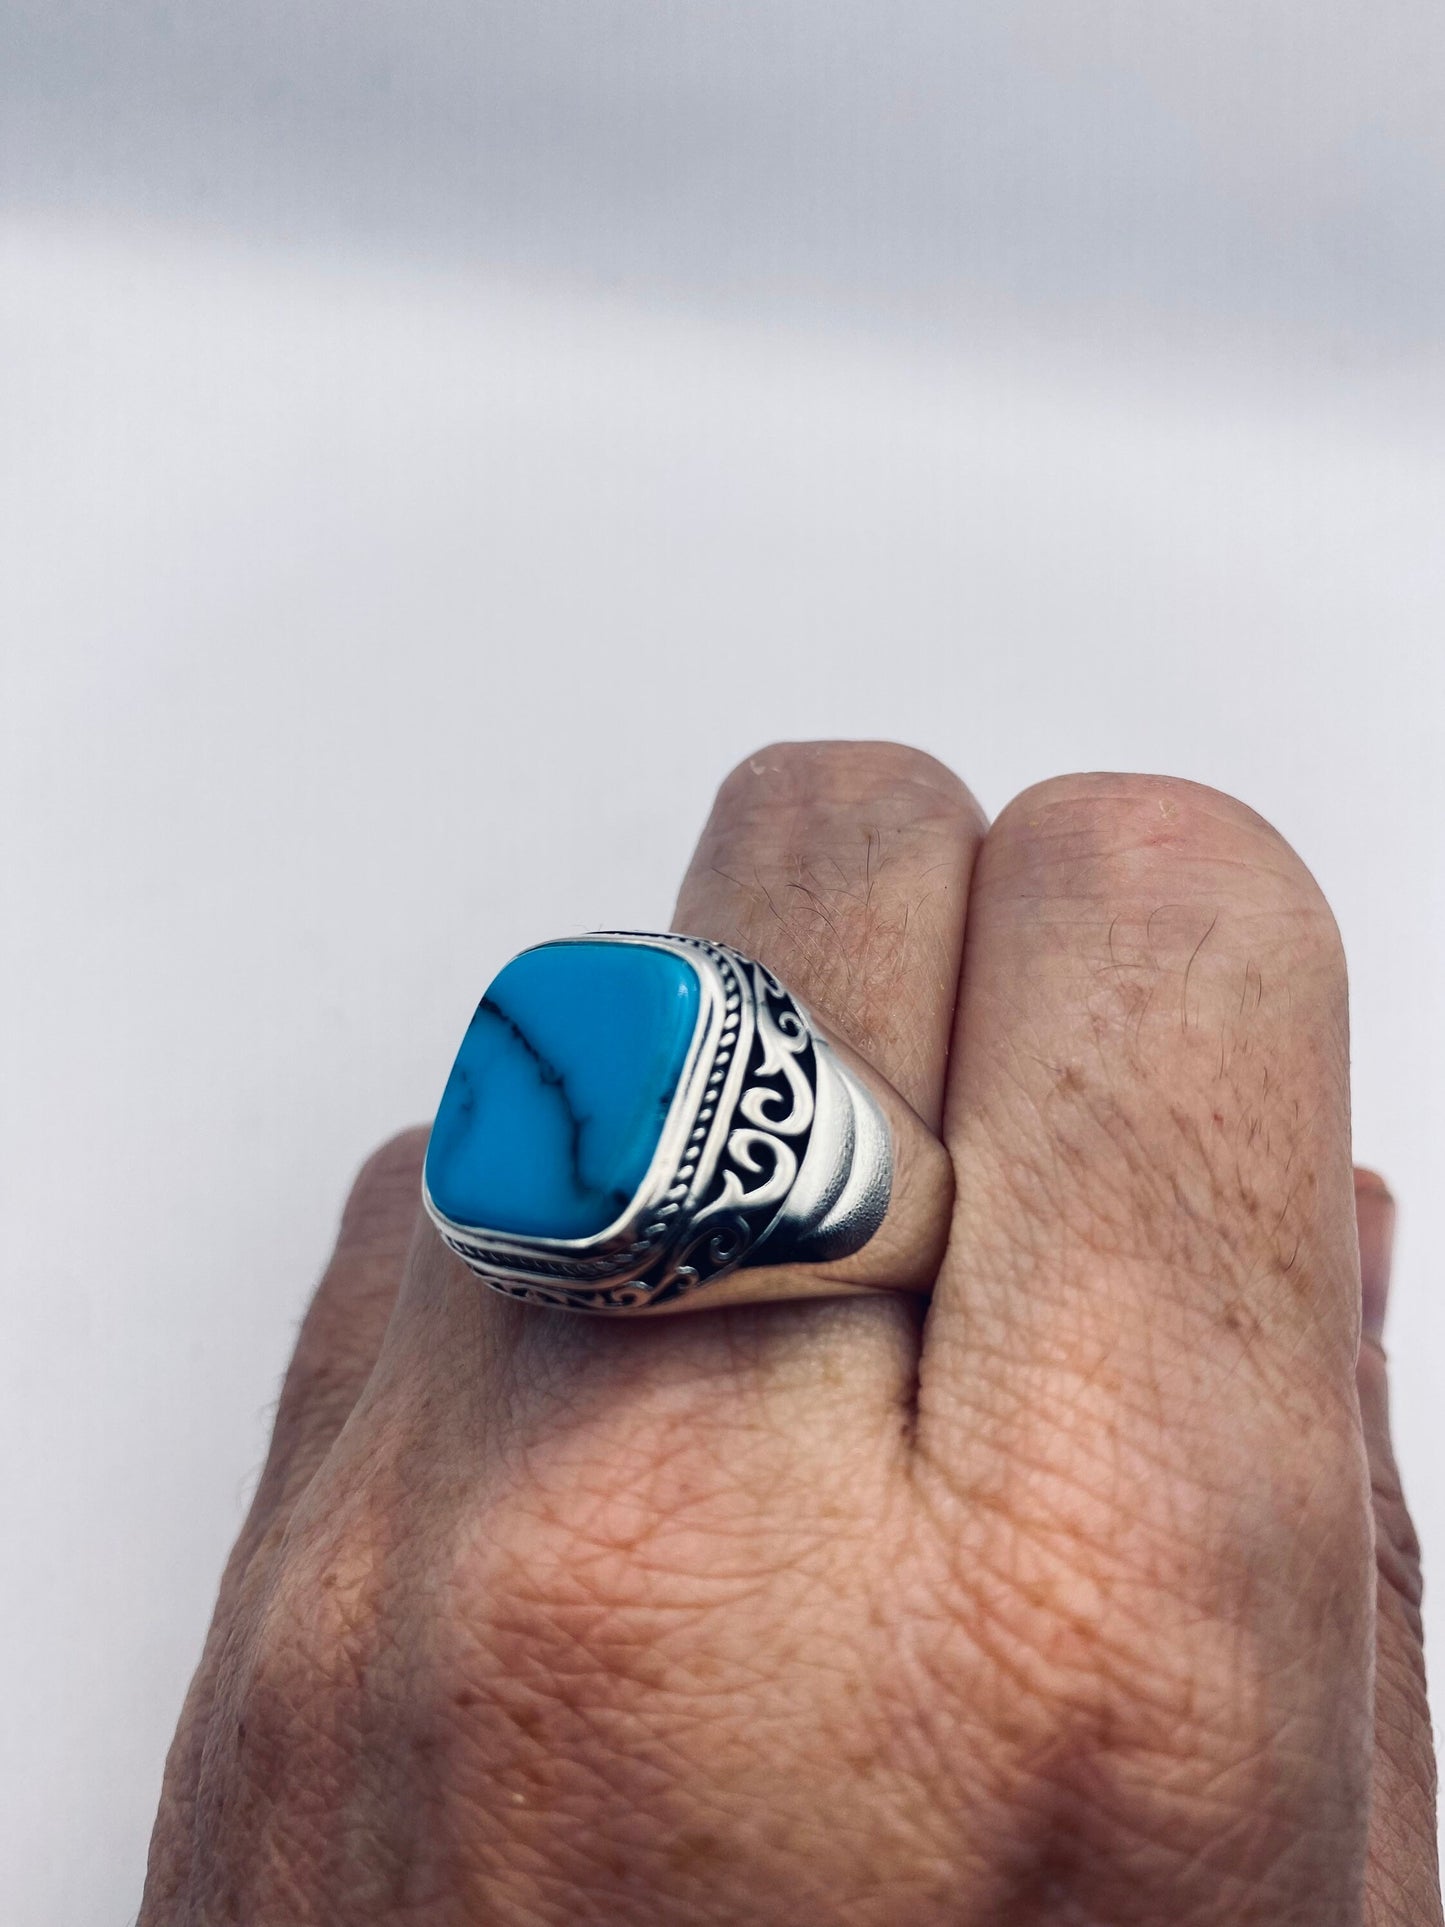 Vintage Turquoise Howlite Mens Ring in 925 Sterling Silver